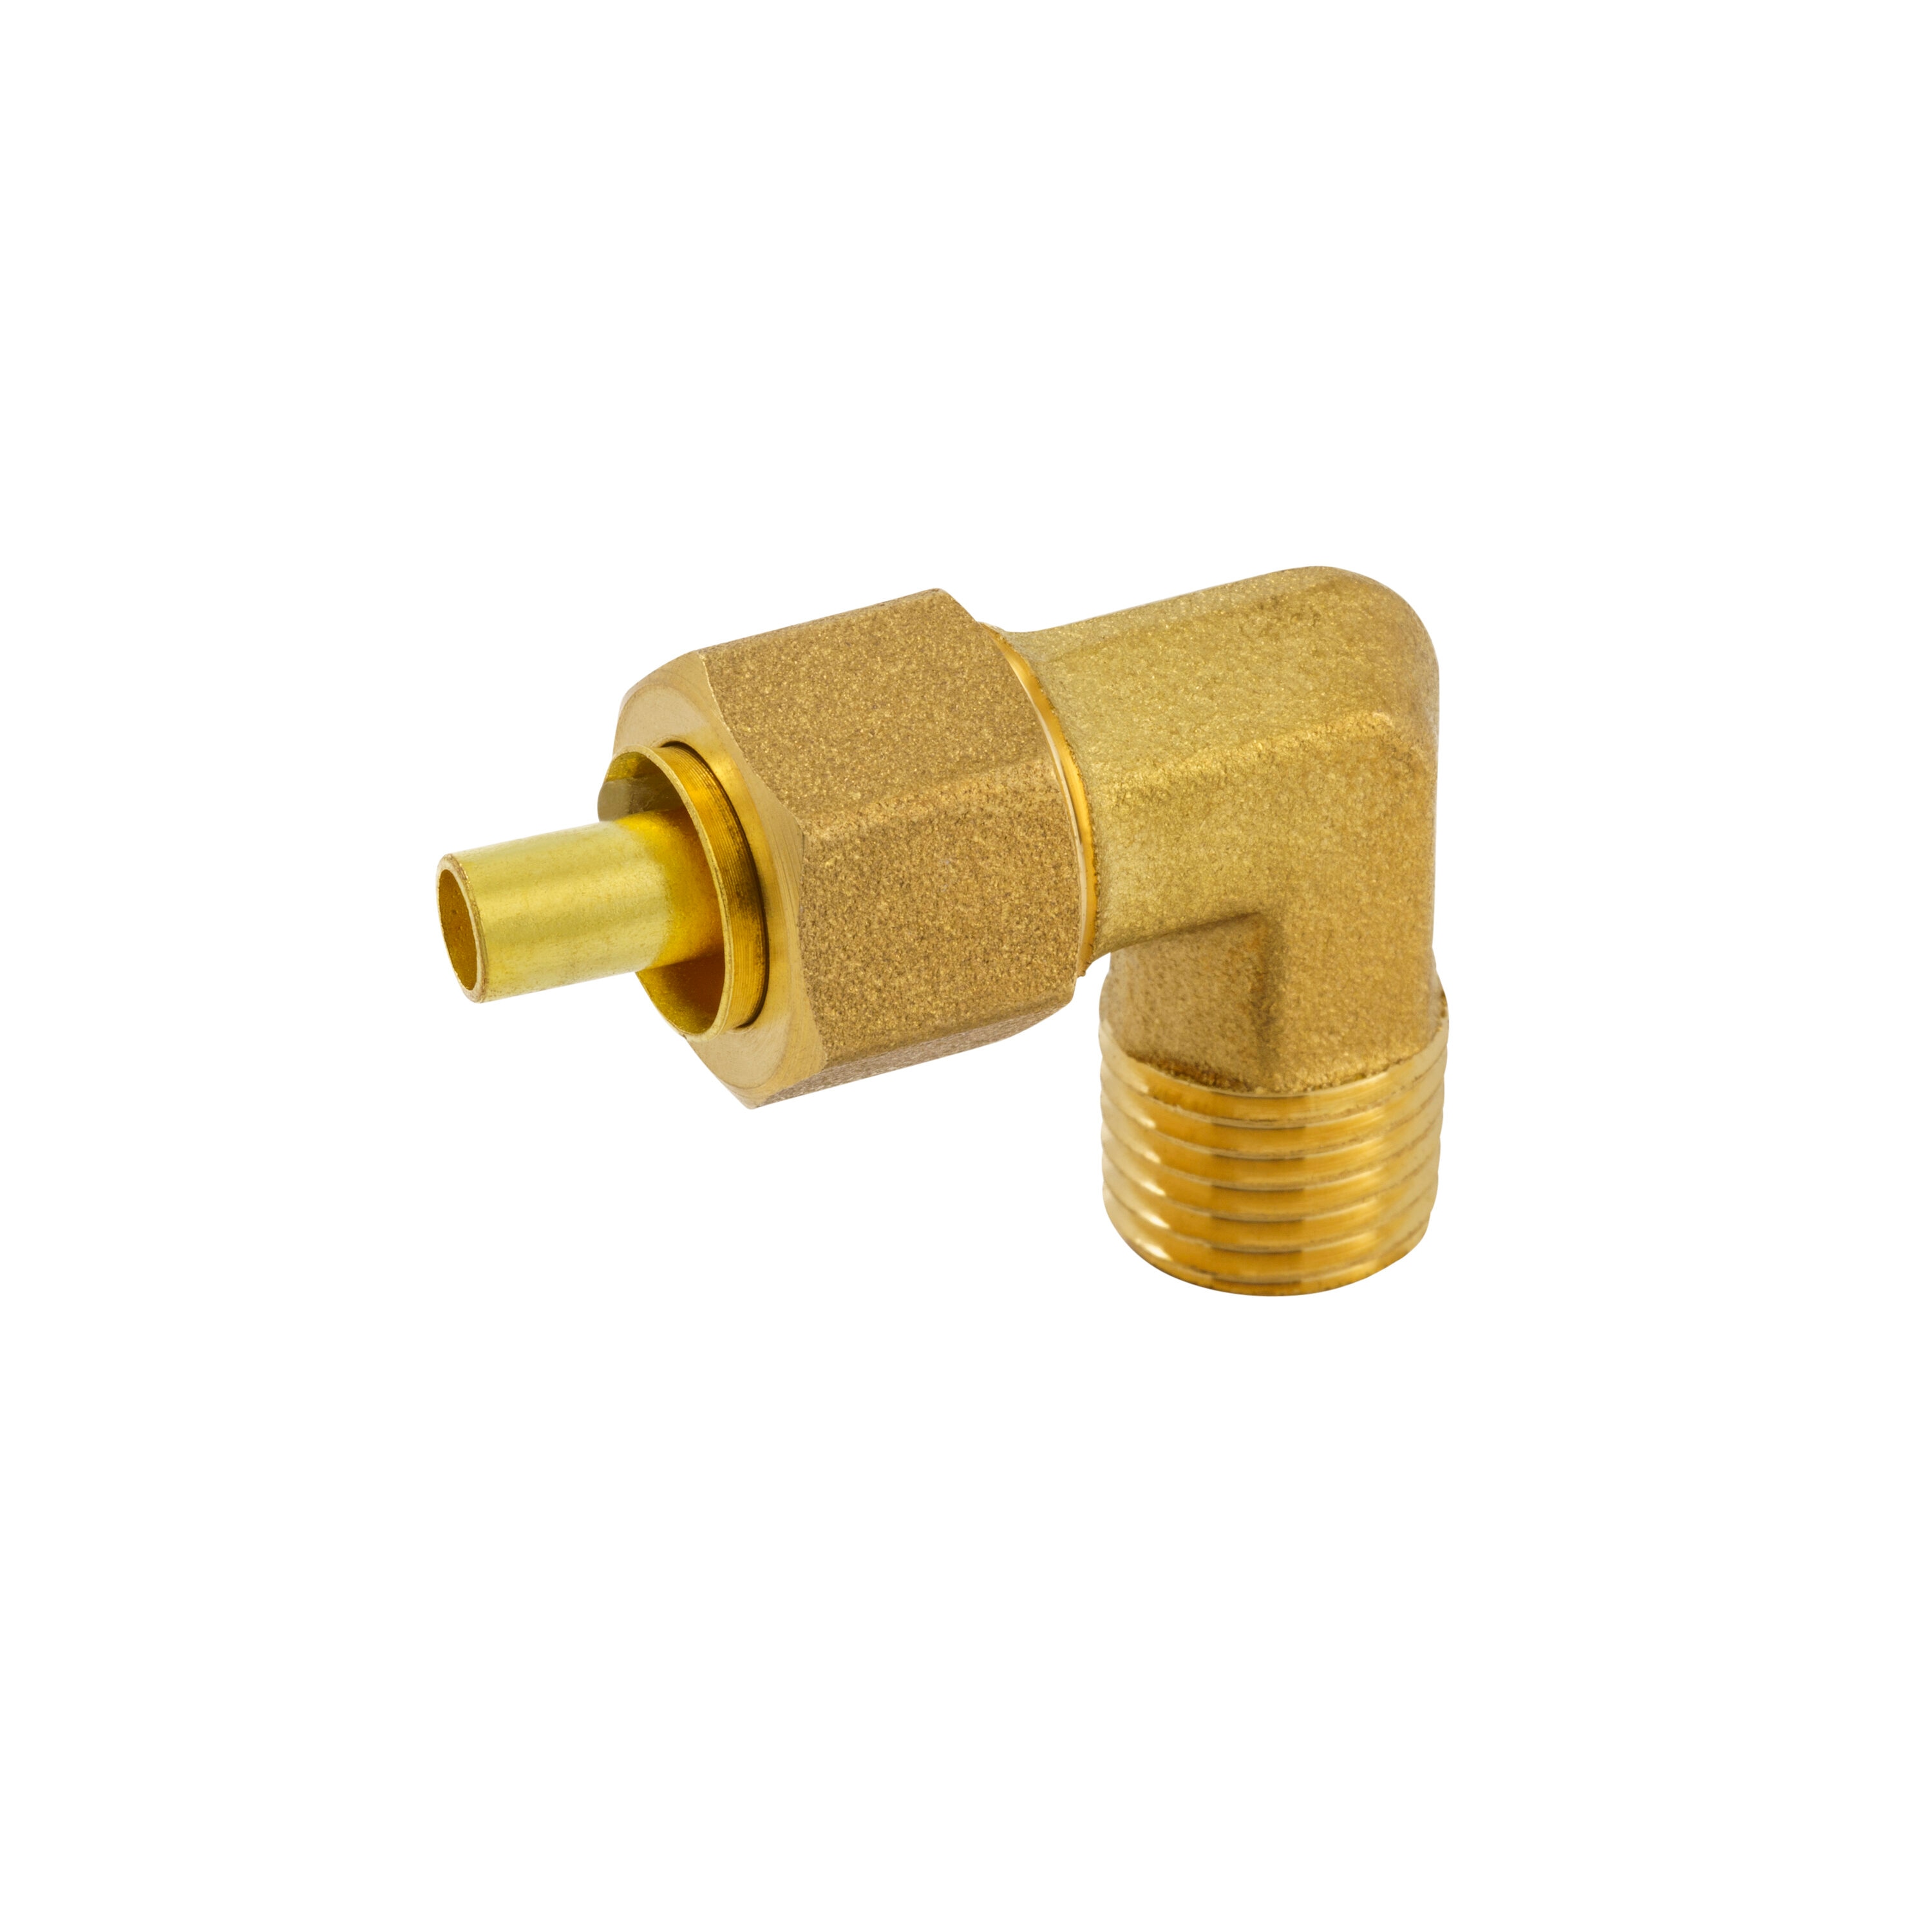 920480-4 Male Elbow: Brass, For 3/4 in Tube OD, 1/2 in. Pipe Thread,  Compression x MNPTF, 2 in. Overall Lg